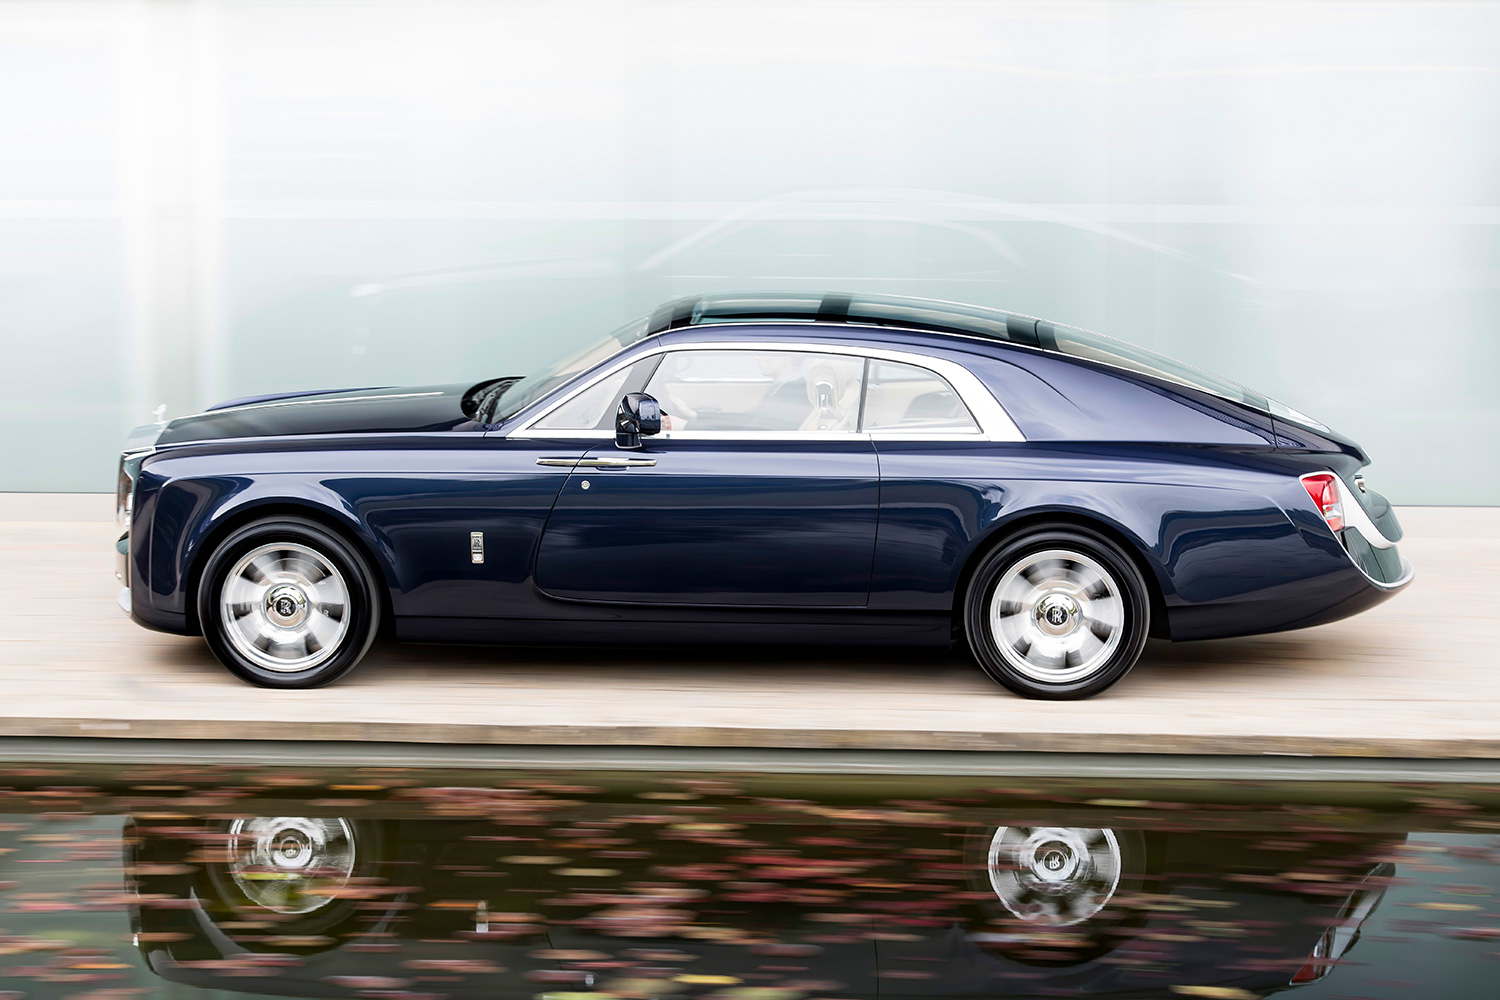 The Rolls-Royce one-of-one Sweptail model, which was at the time the most expensive new car ever sold